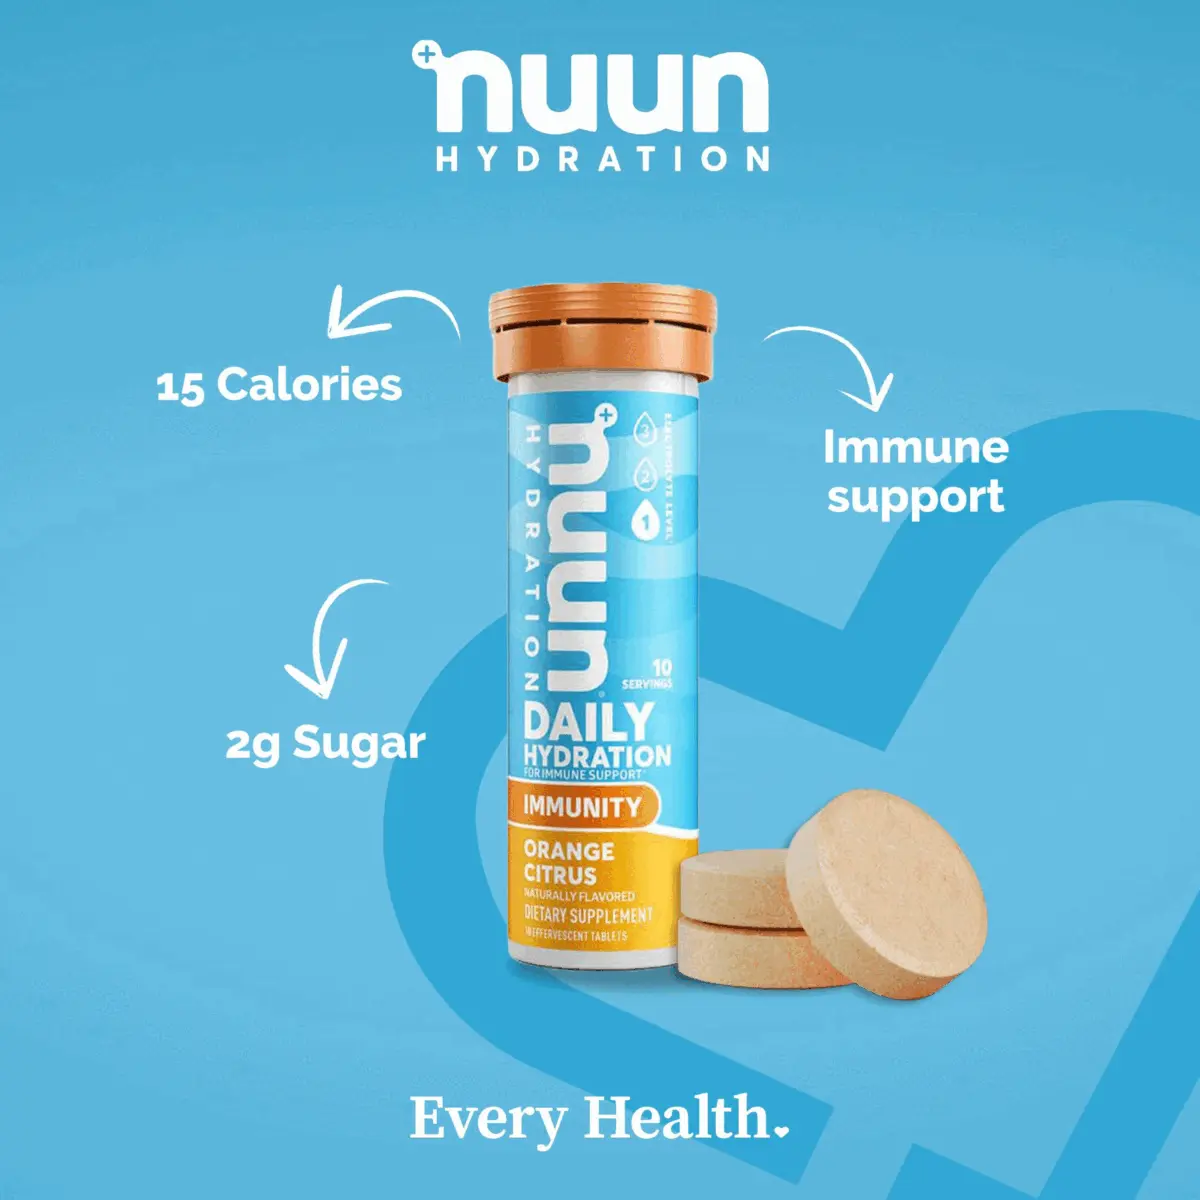 Nuun hydration. 15 calories, immune support, 2g sugar. EVERY HEALTH. Free Nuun samples on orders over £40.00.